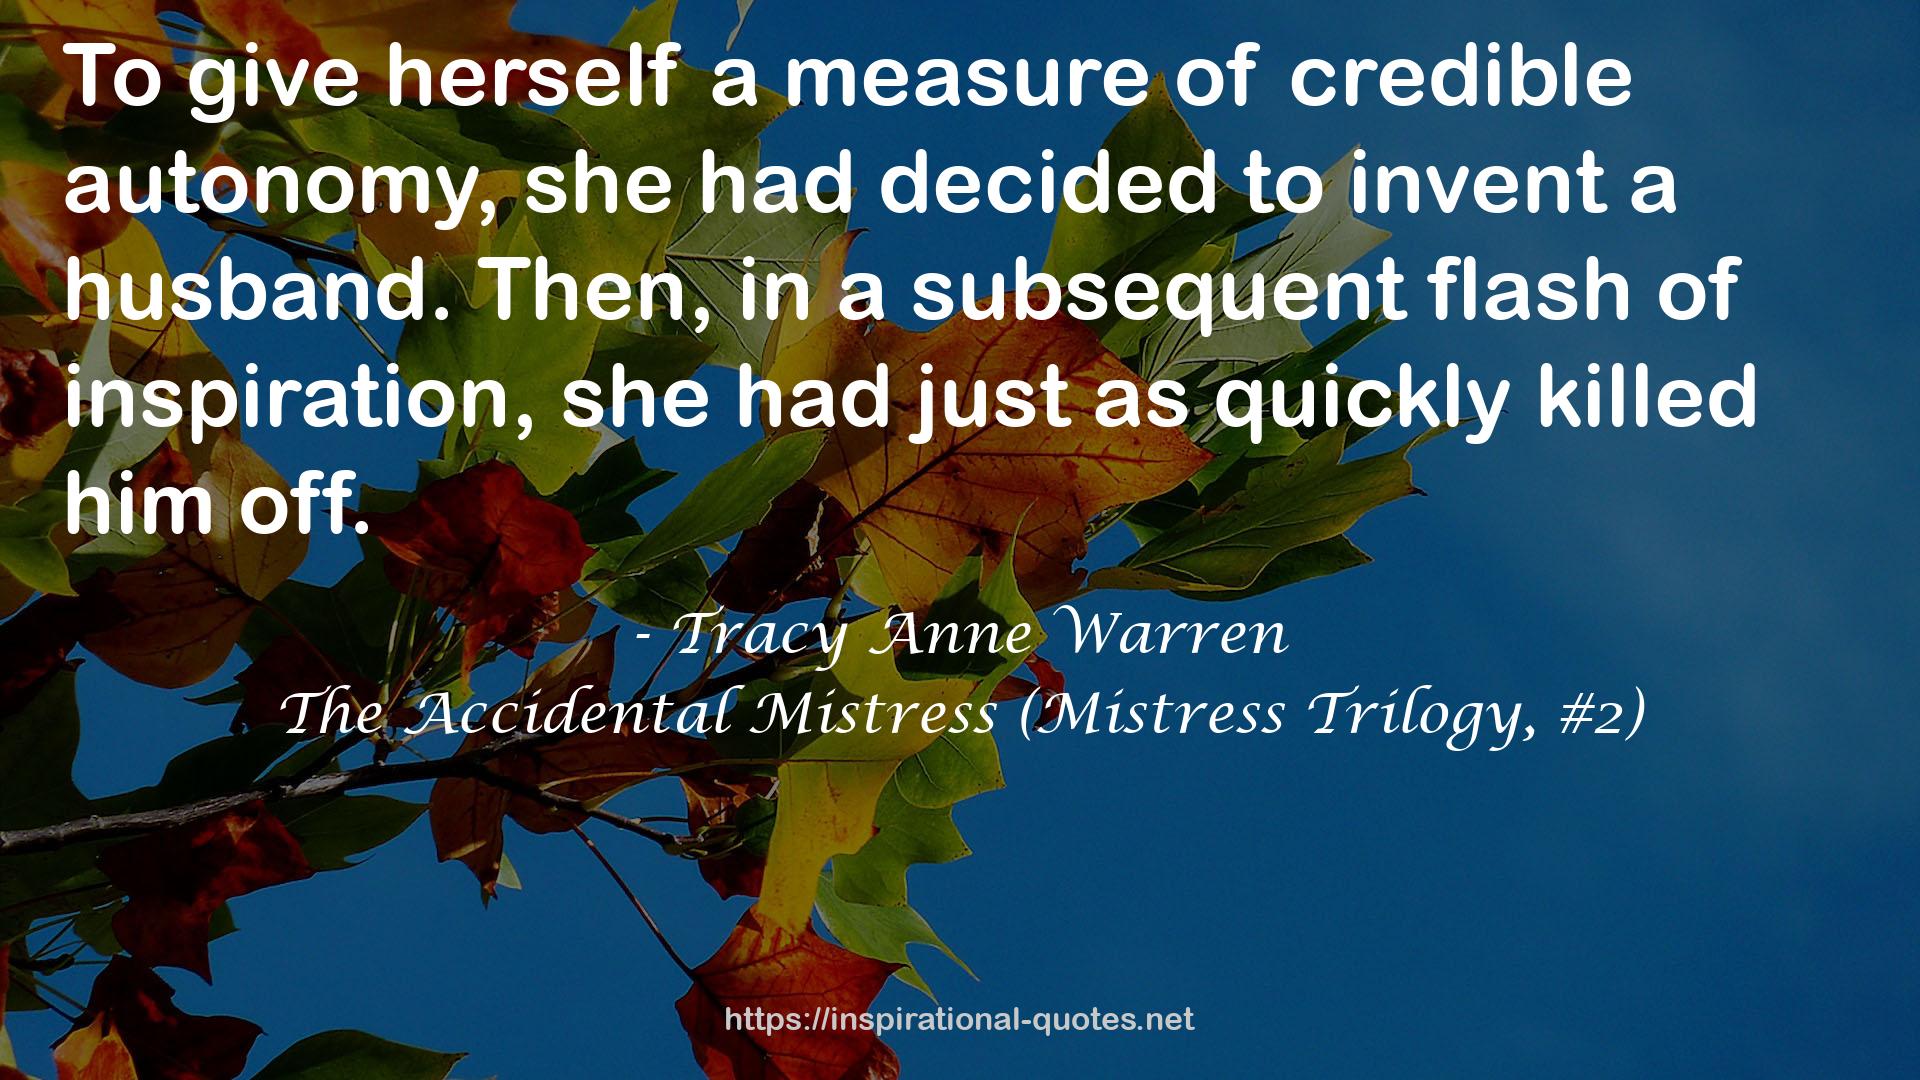 The Accidental Mistress (Mistress Trilogy, #2) QUOTES